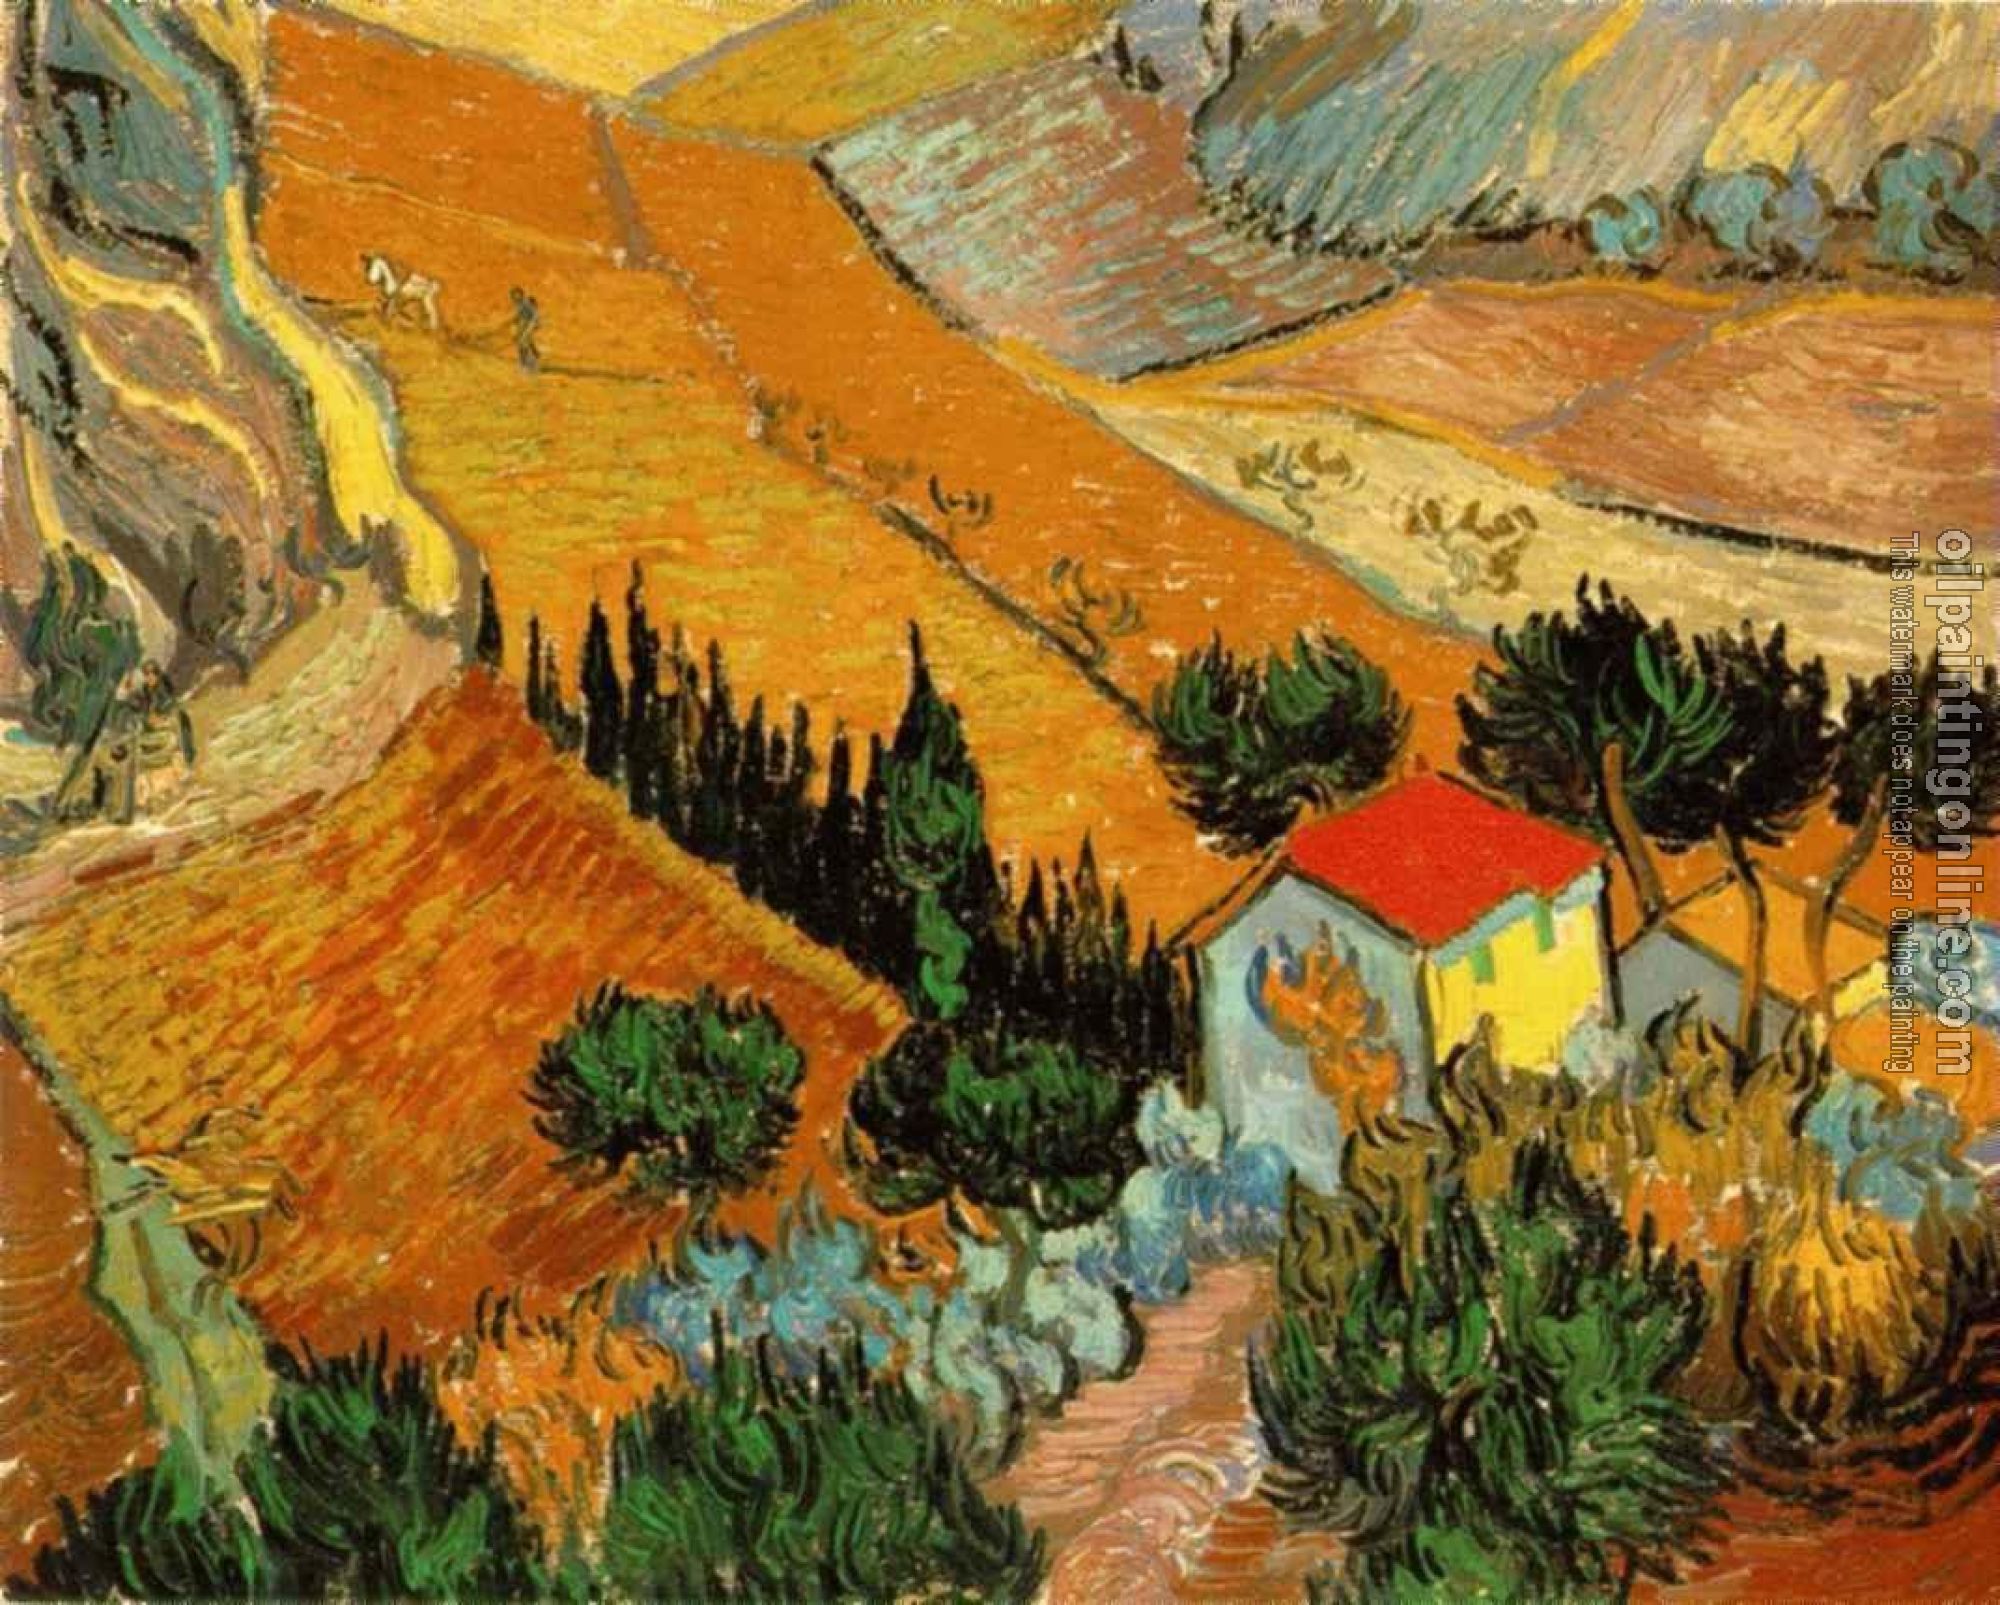 Gogh, Vincent van - Valley with Ploughman Seen from Above